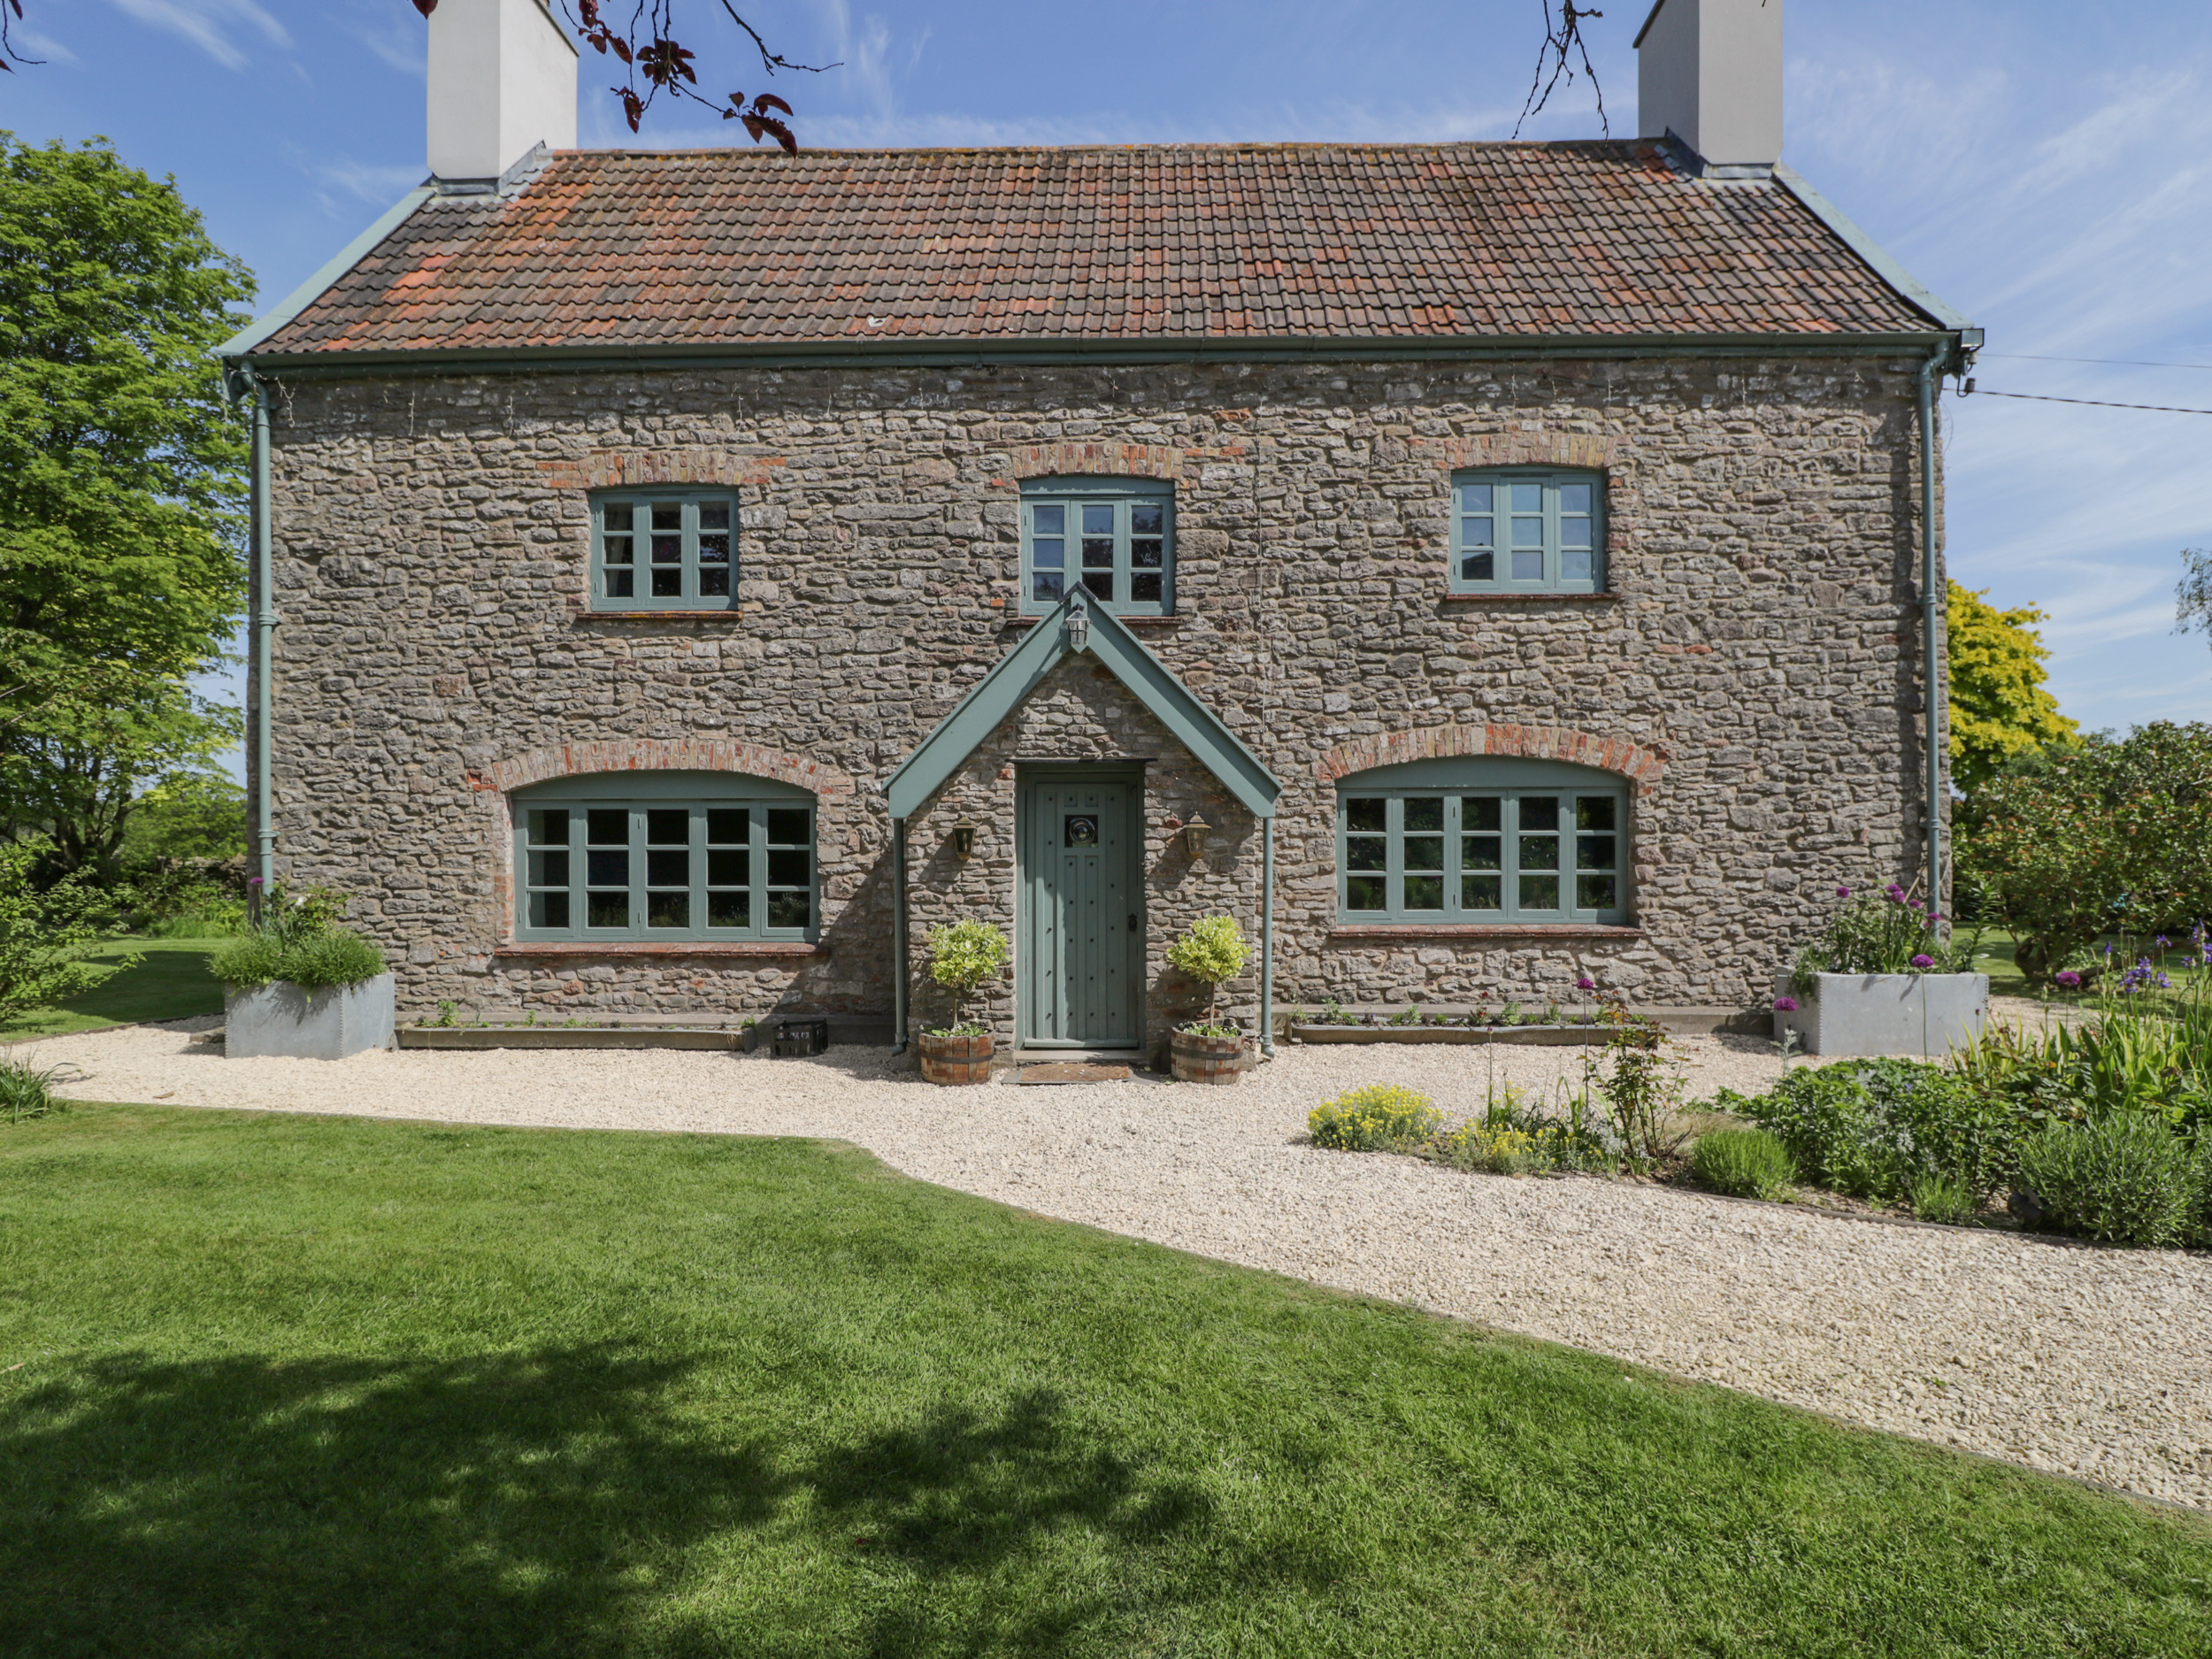 Manor Farm House is in Failand, Somerset. Four-bedroom home, with hot tub, private pond, and gardens